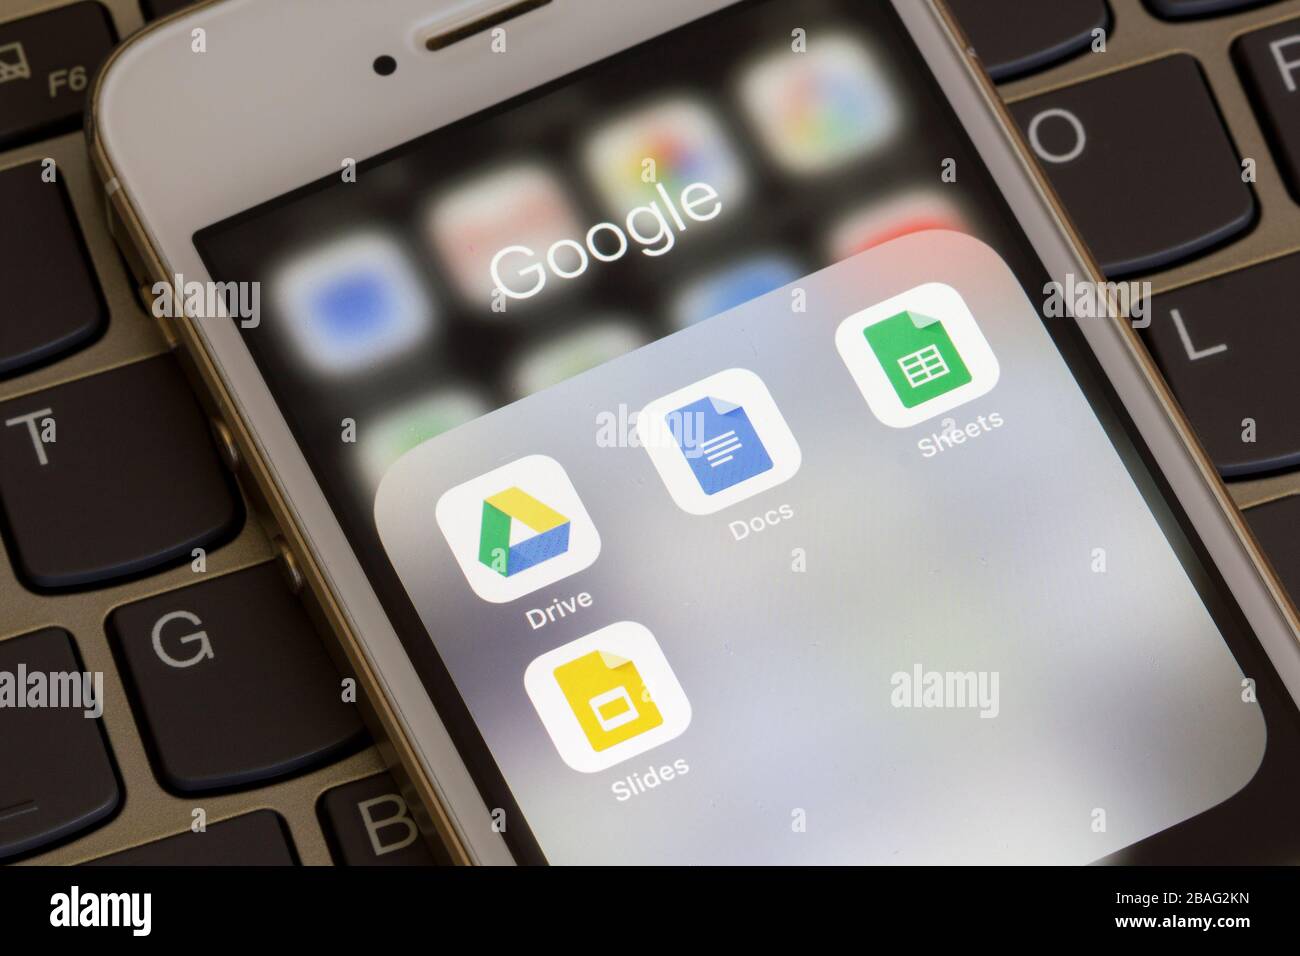 Mobile app icons of Google Drive Enterprise suite with Google Docs, Sheets, and Slides are seen on a smartphone. Stock Photo